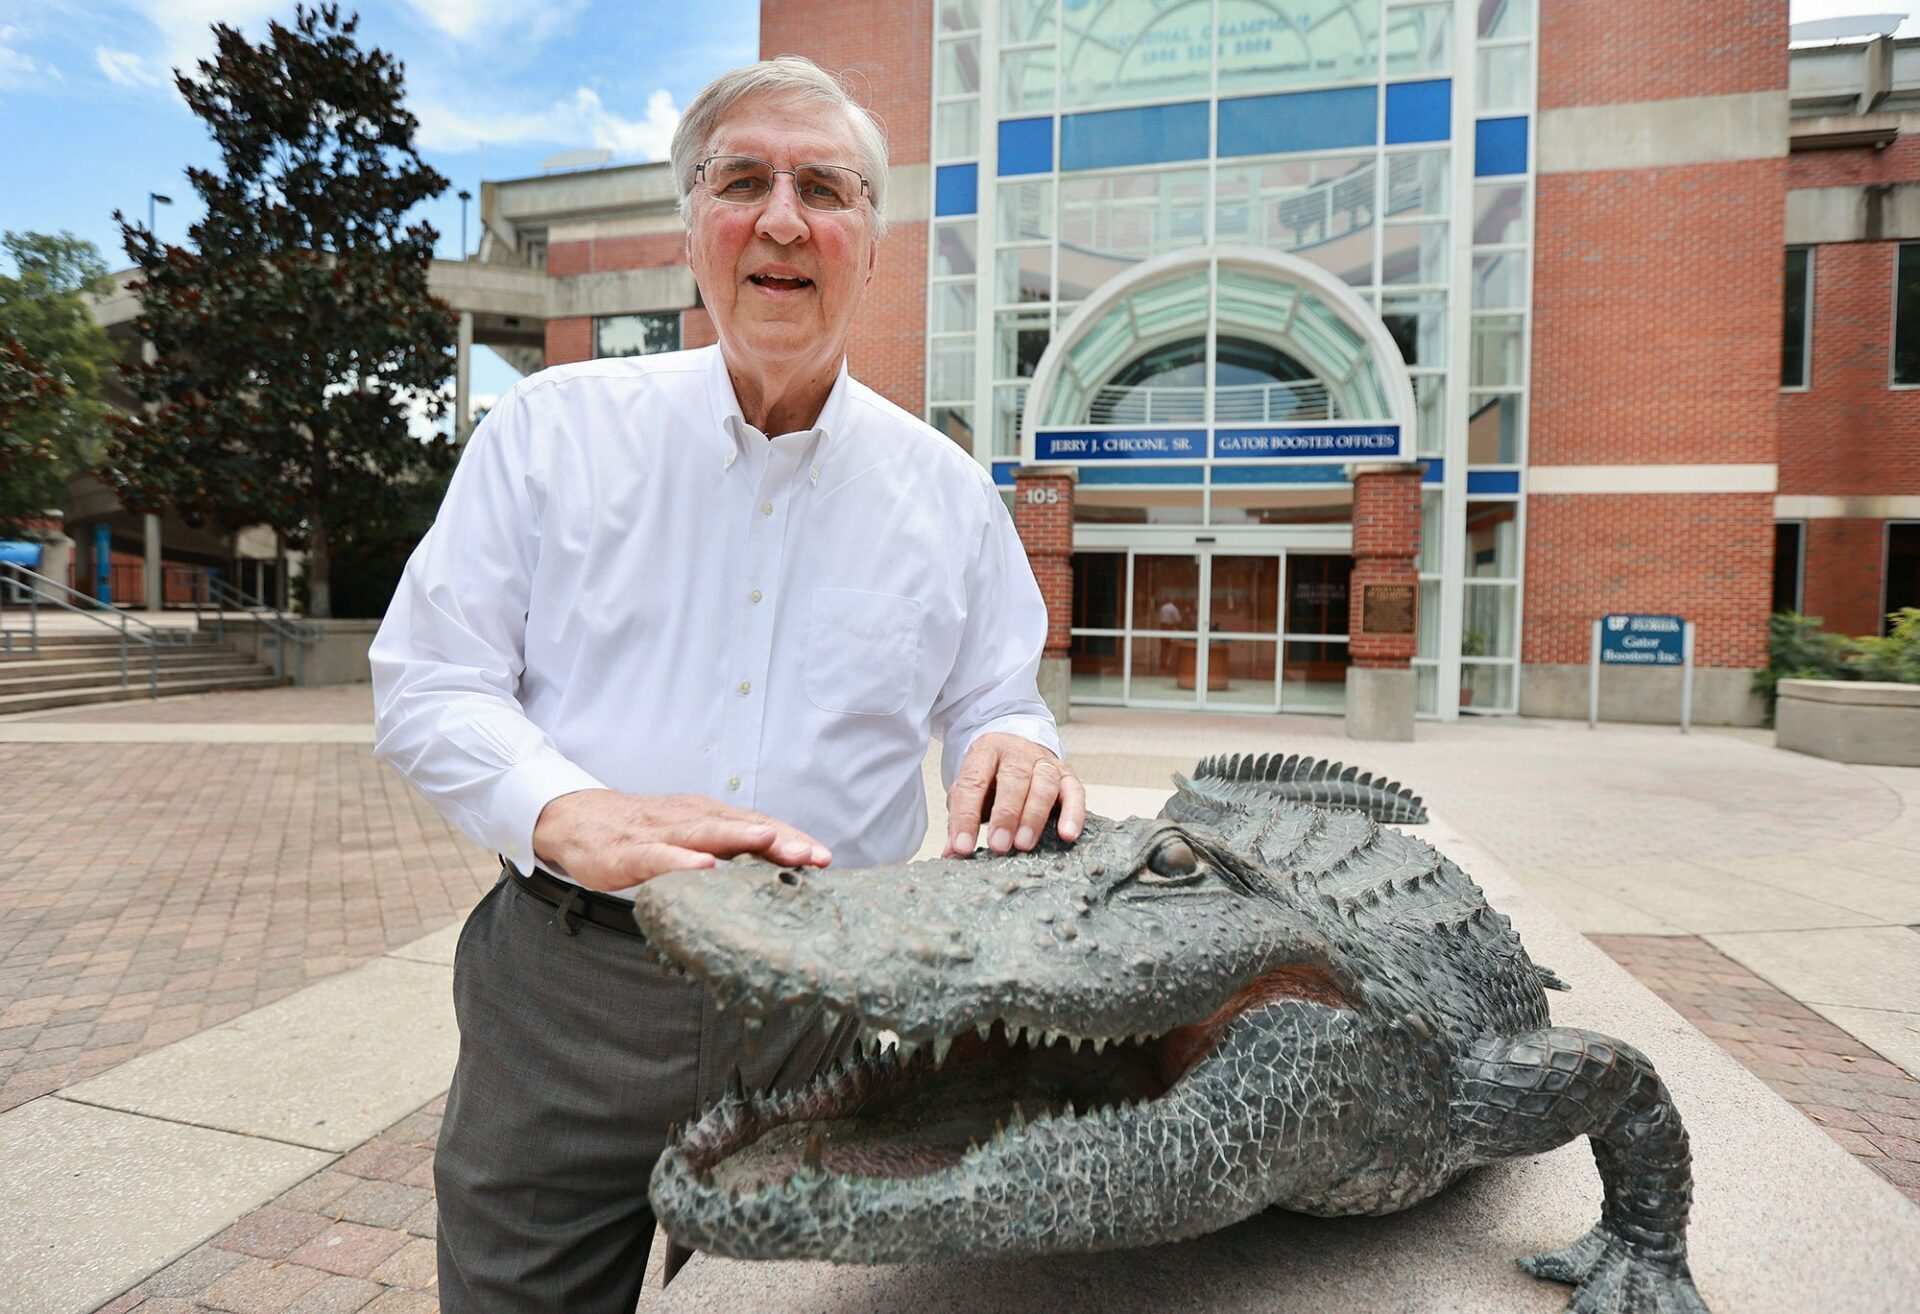 Former Gators’ AD and All-American Bill Carr dies at age 78